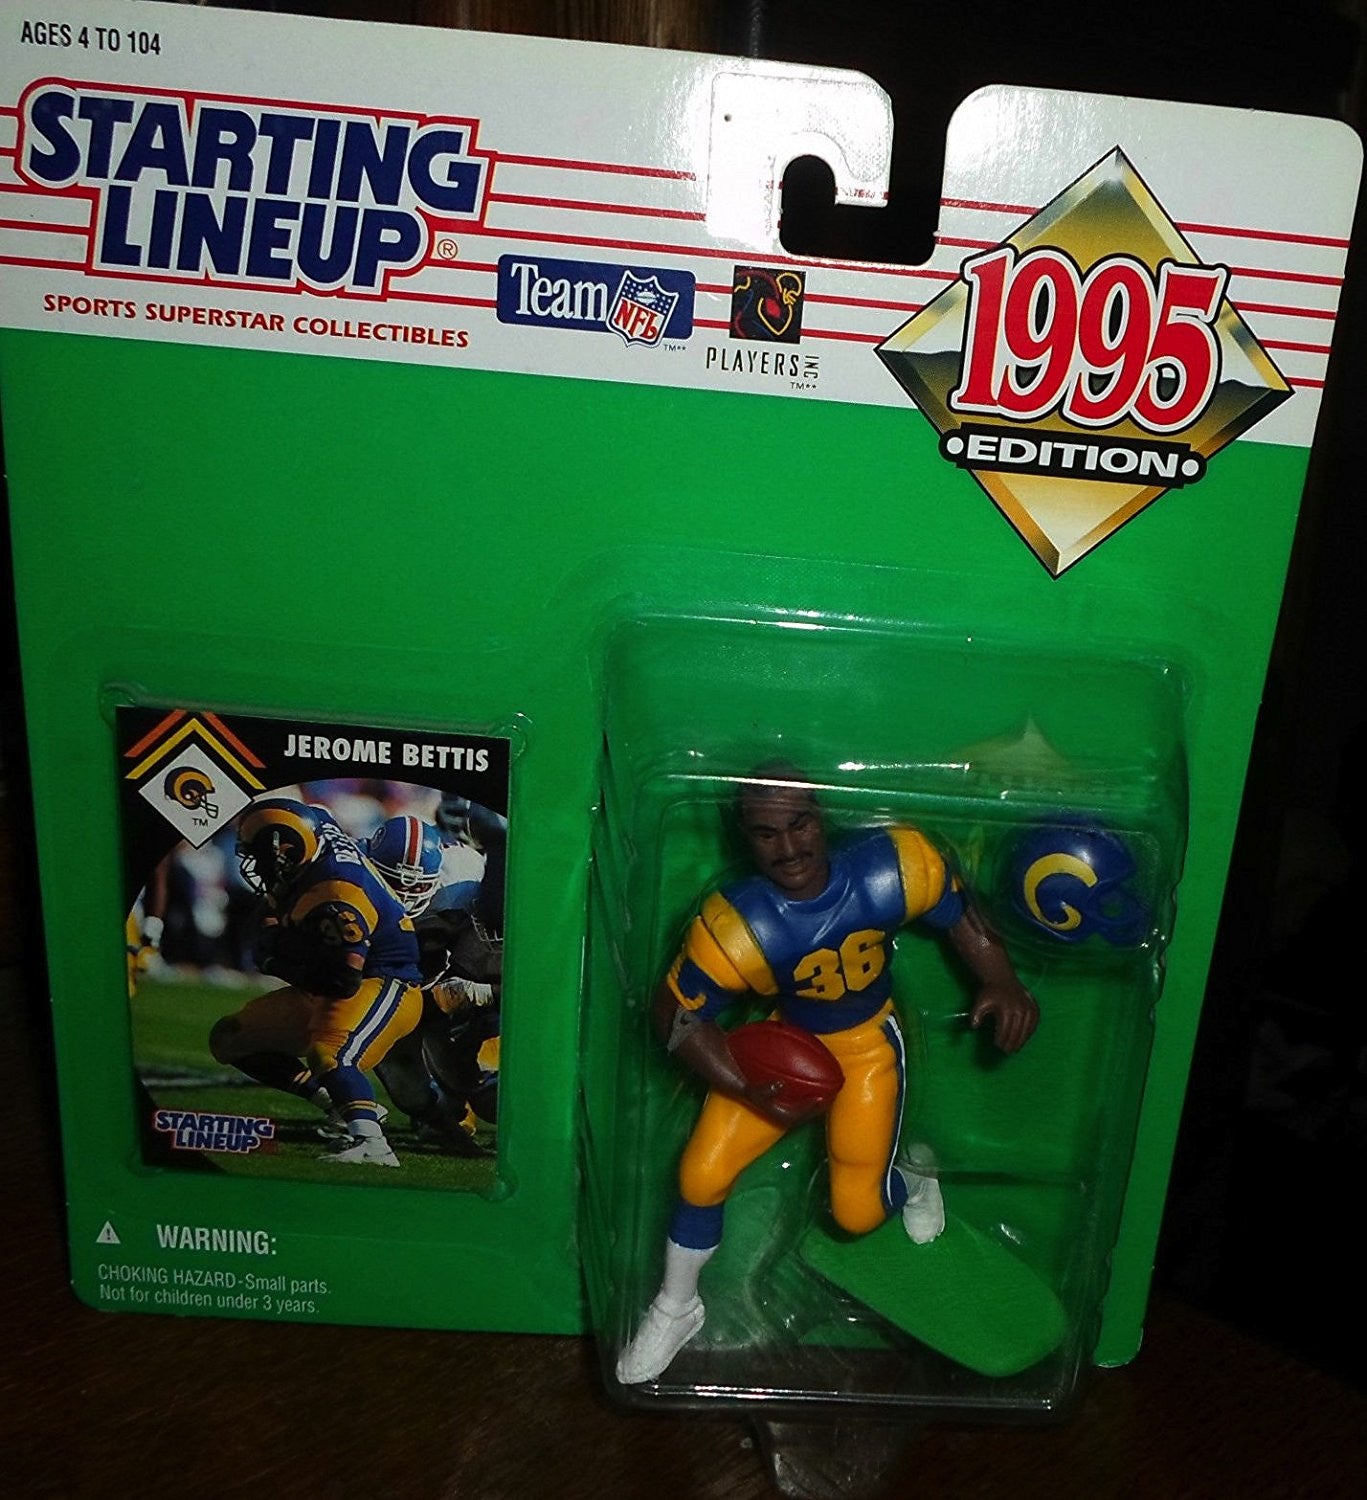 Starting Lineup 1995 Edition Jerome Bettis